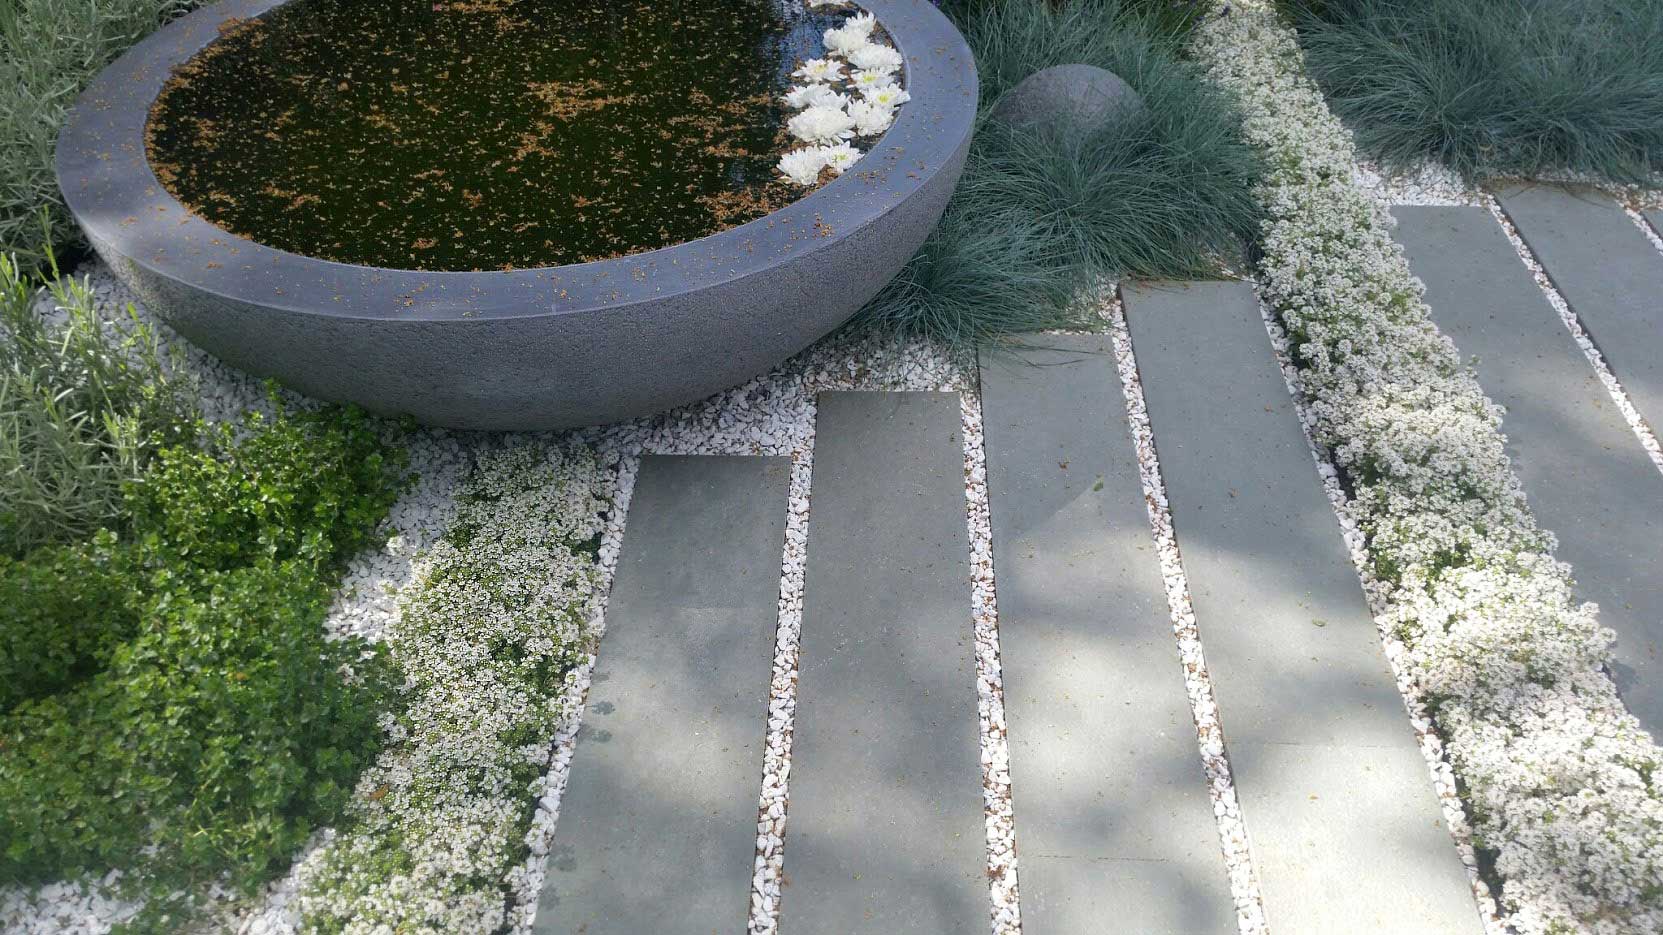 Detail of planter and paving in Rae Wilkinson's RHS Hampton Court Show Garden. Rae Wilkinson Garden and Landscape Design Surrey, Sussex, Hampshire, London, South-East England